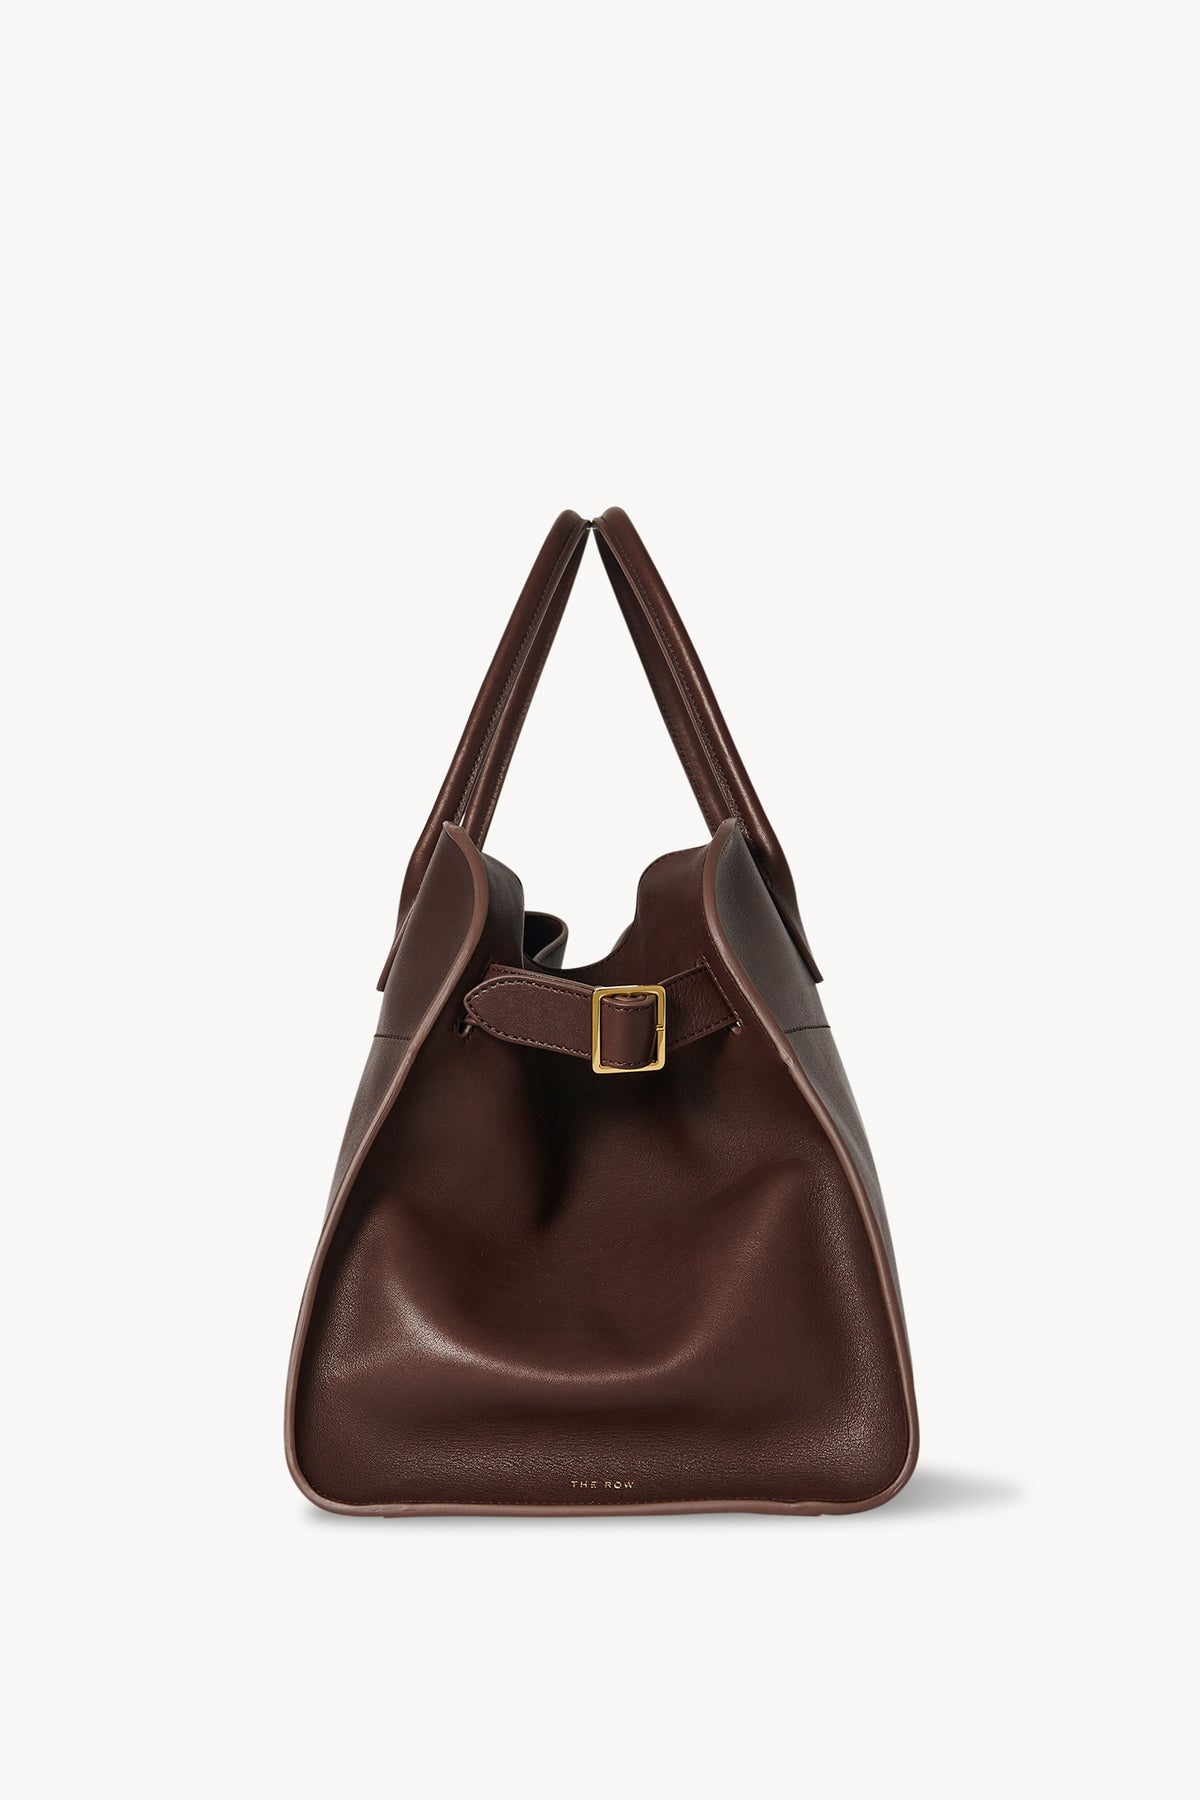 The Row Soft Margaux 17 Top Handle Bag in Cuir SHG